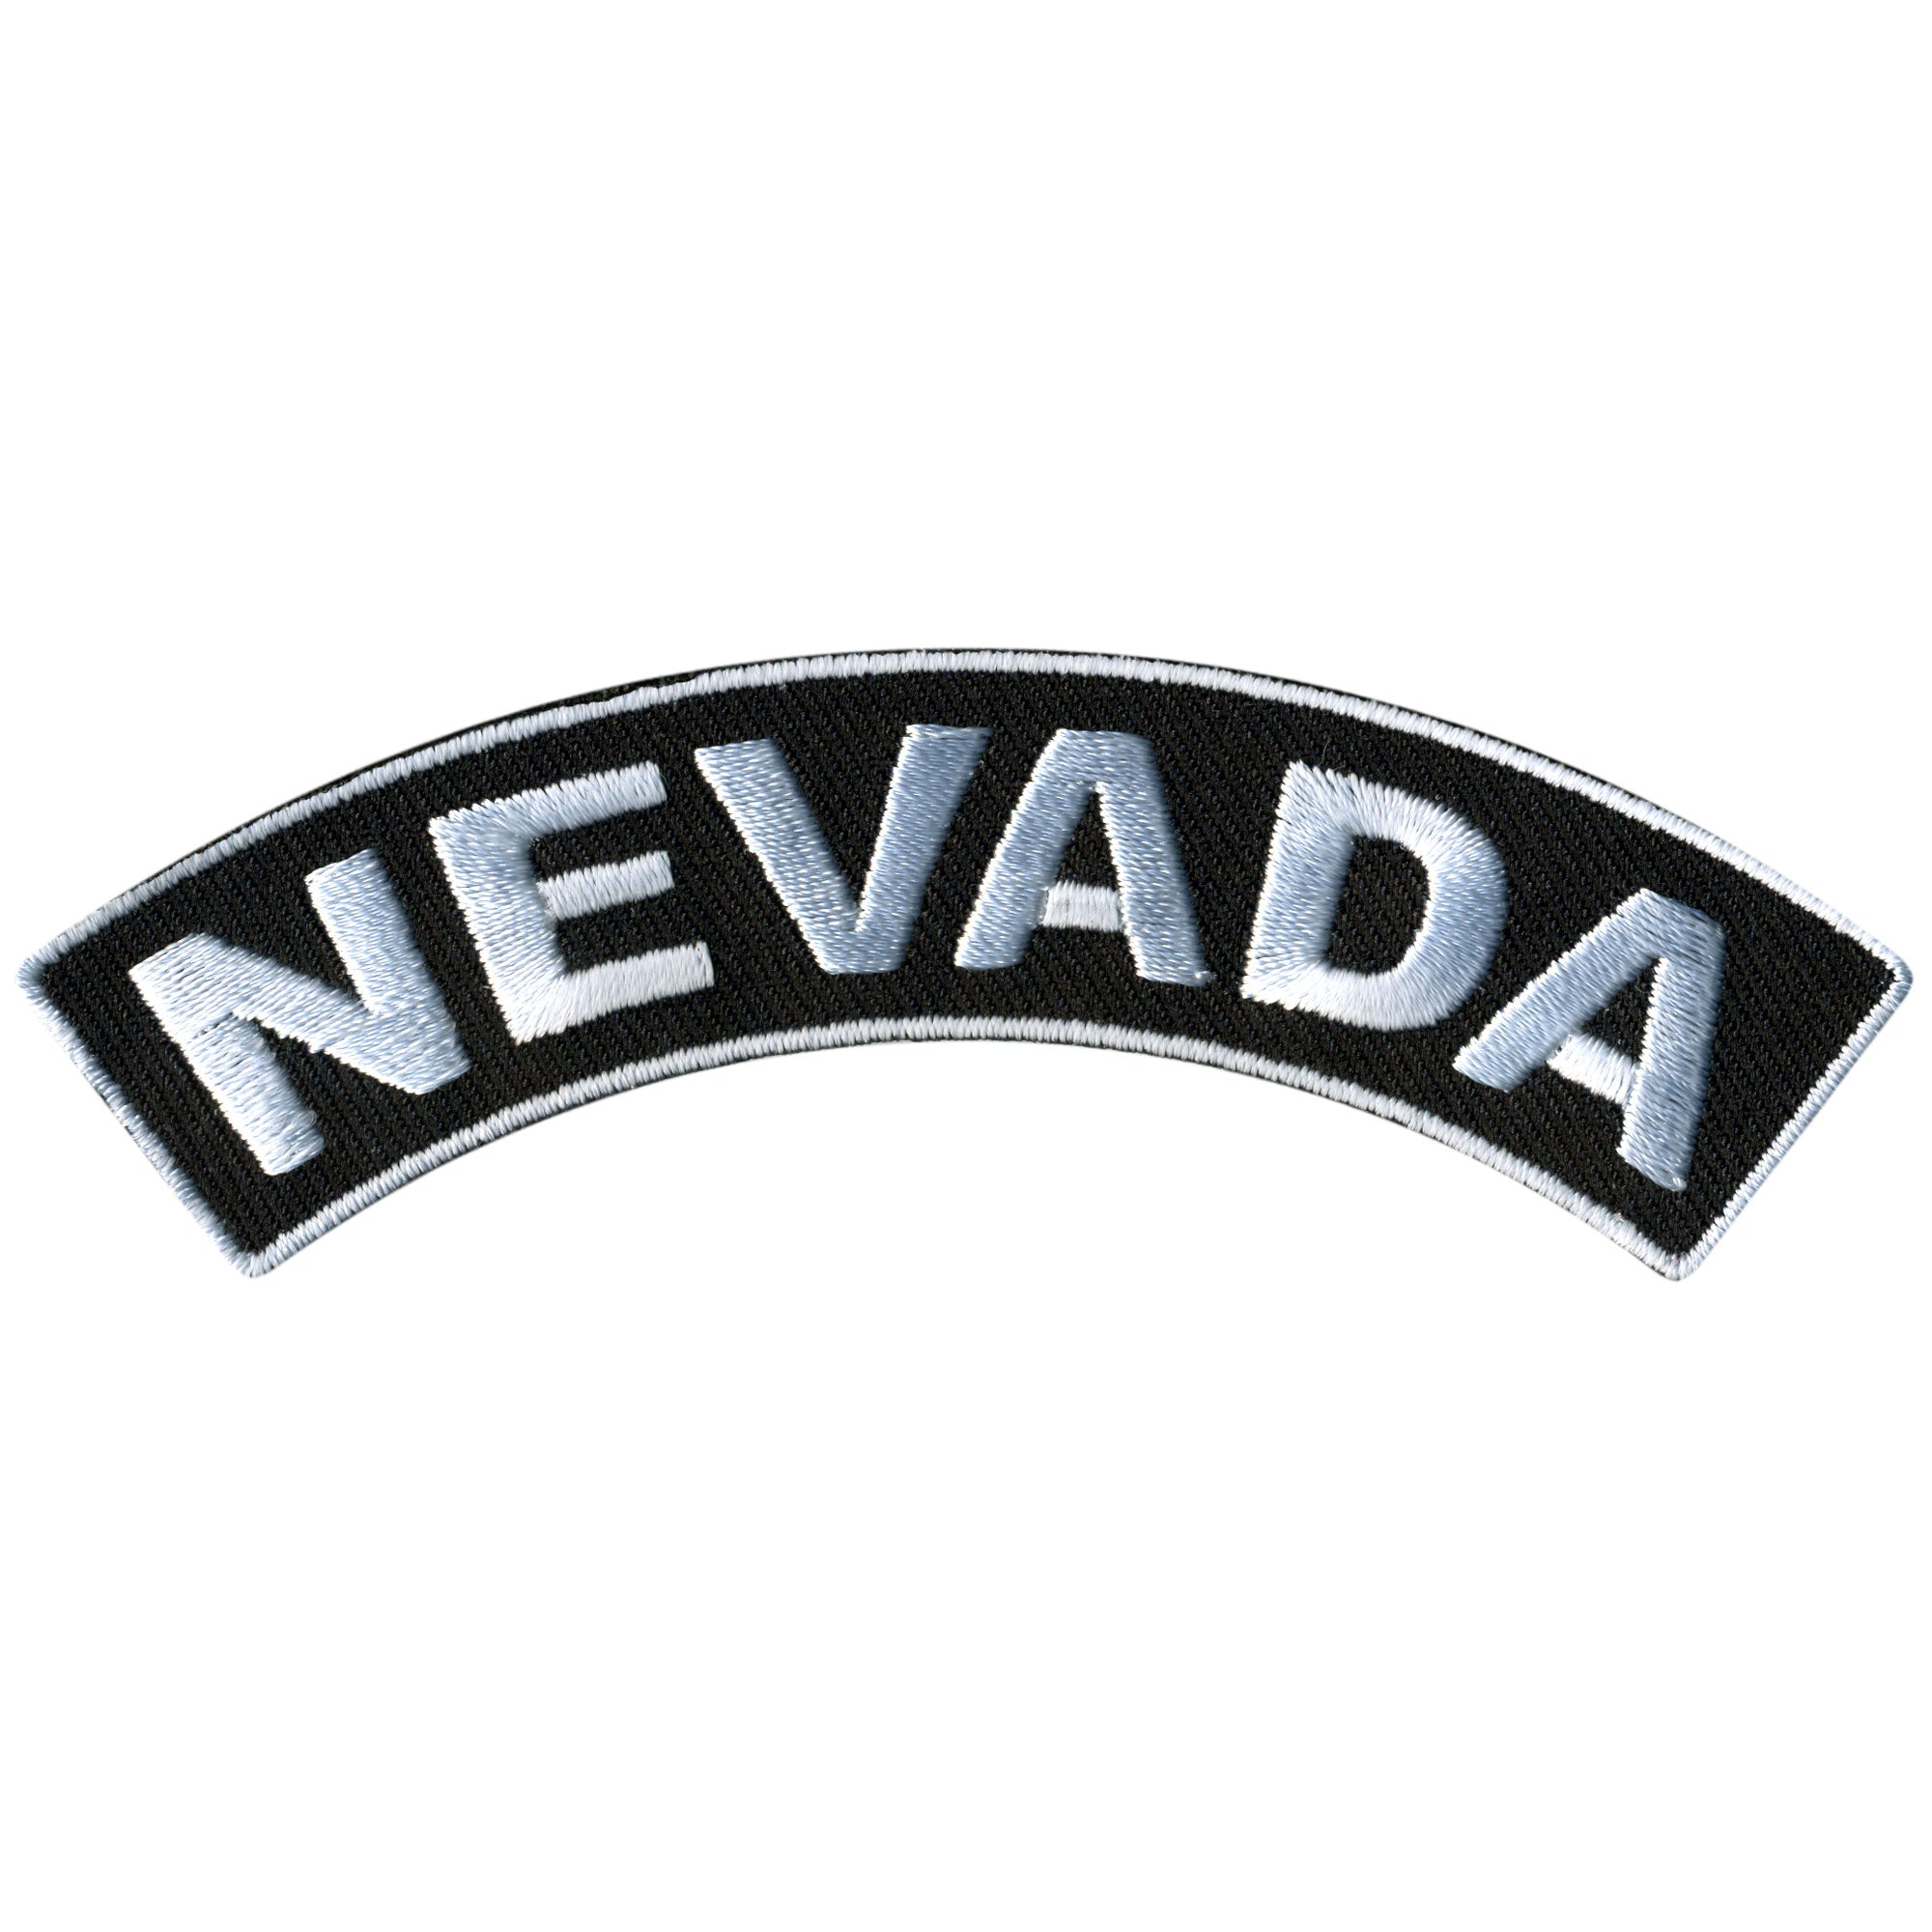 Hot Leathers Nevada  4" X 1" Top Rocker Patch